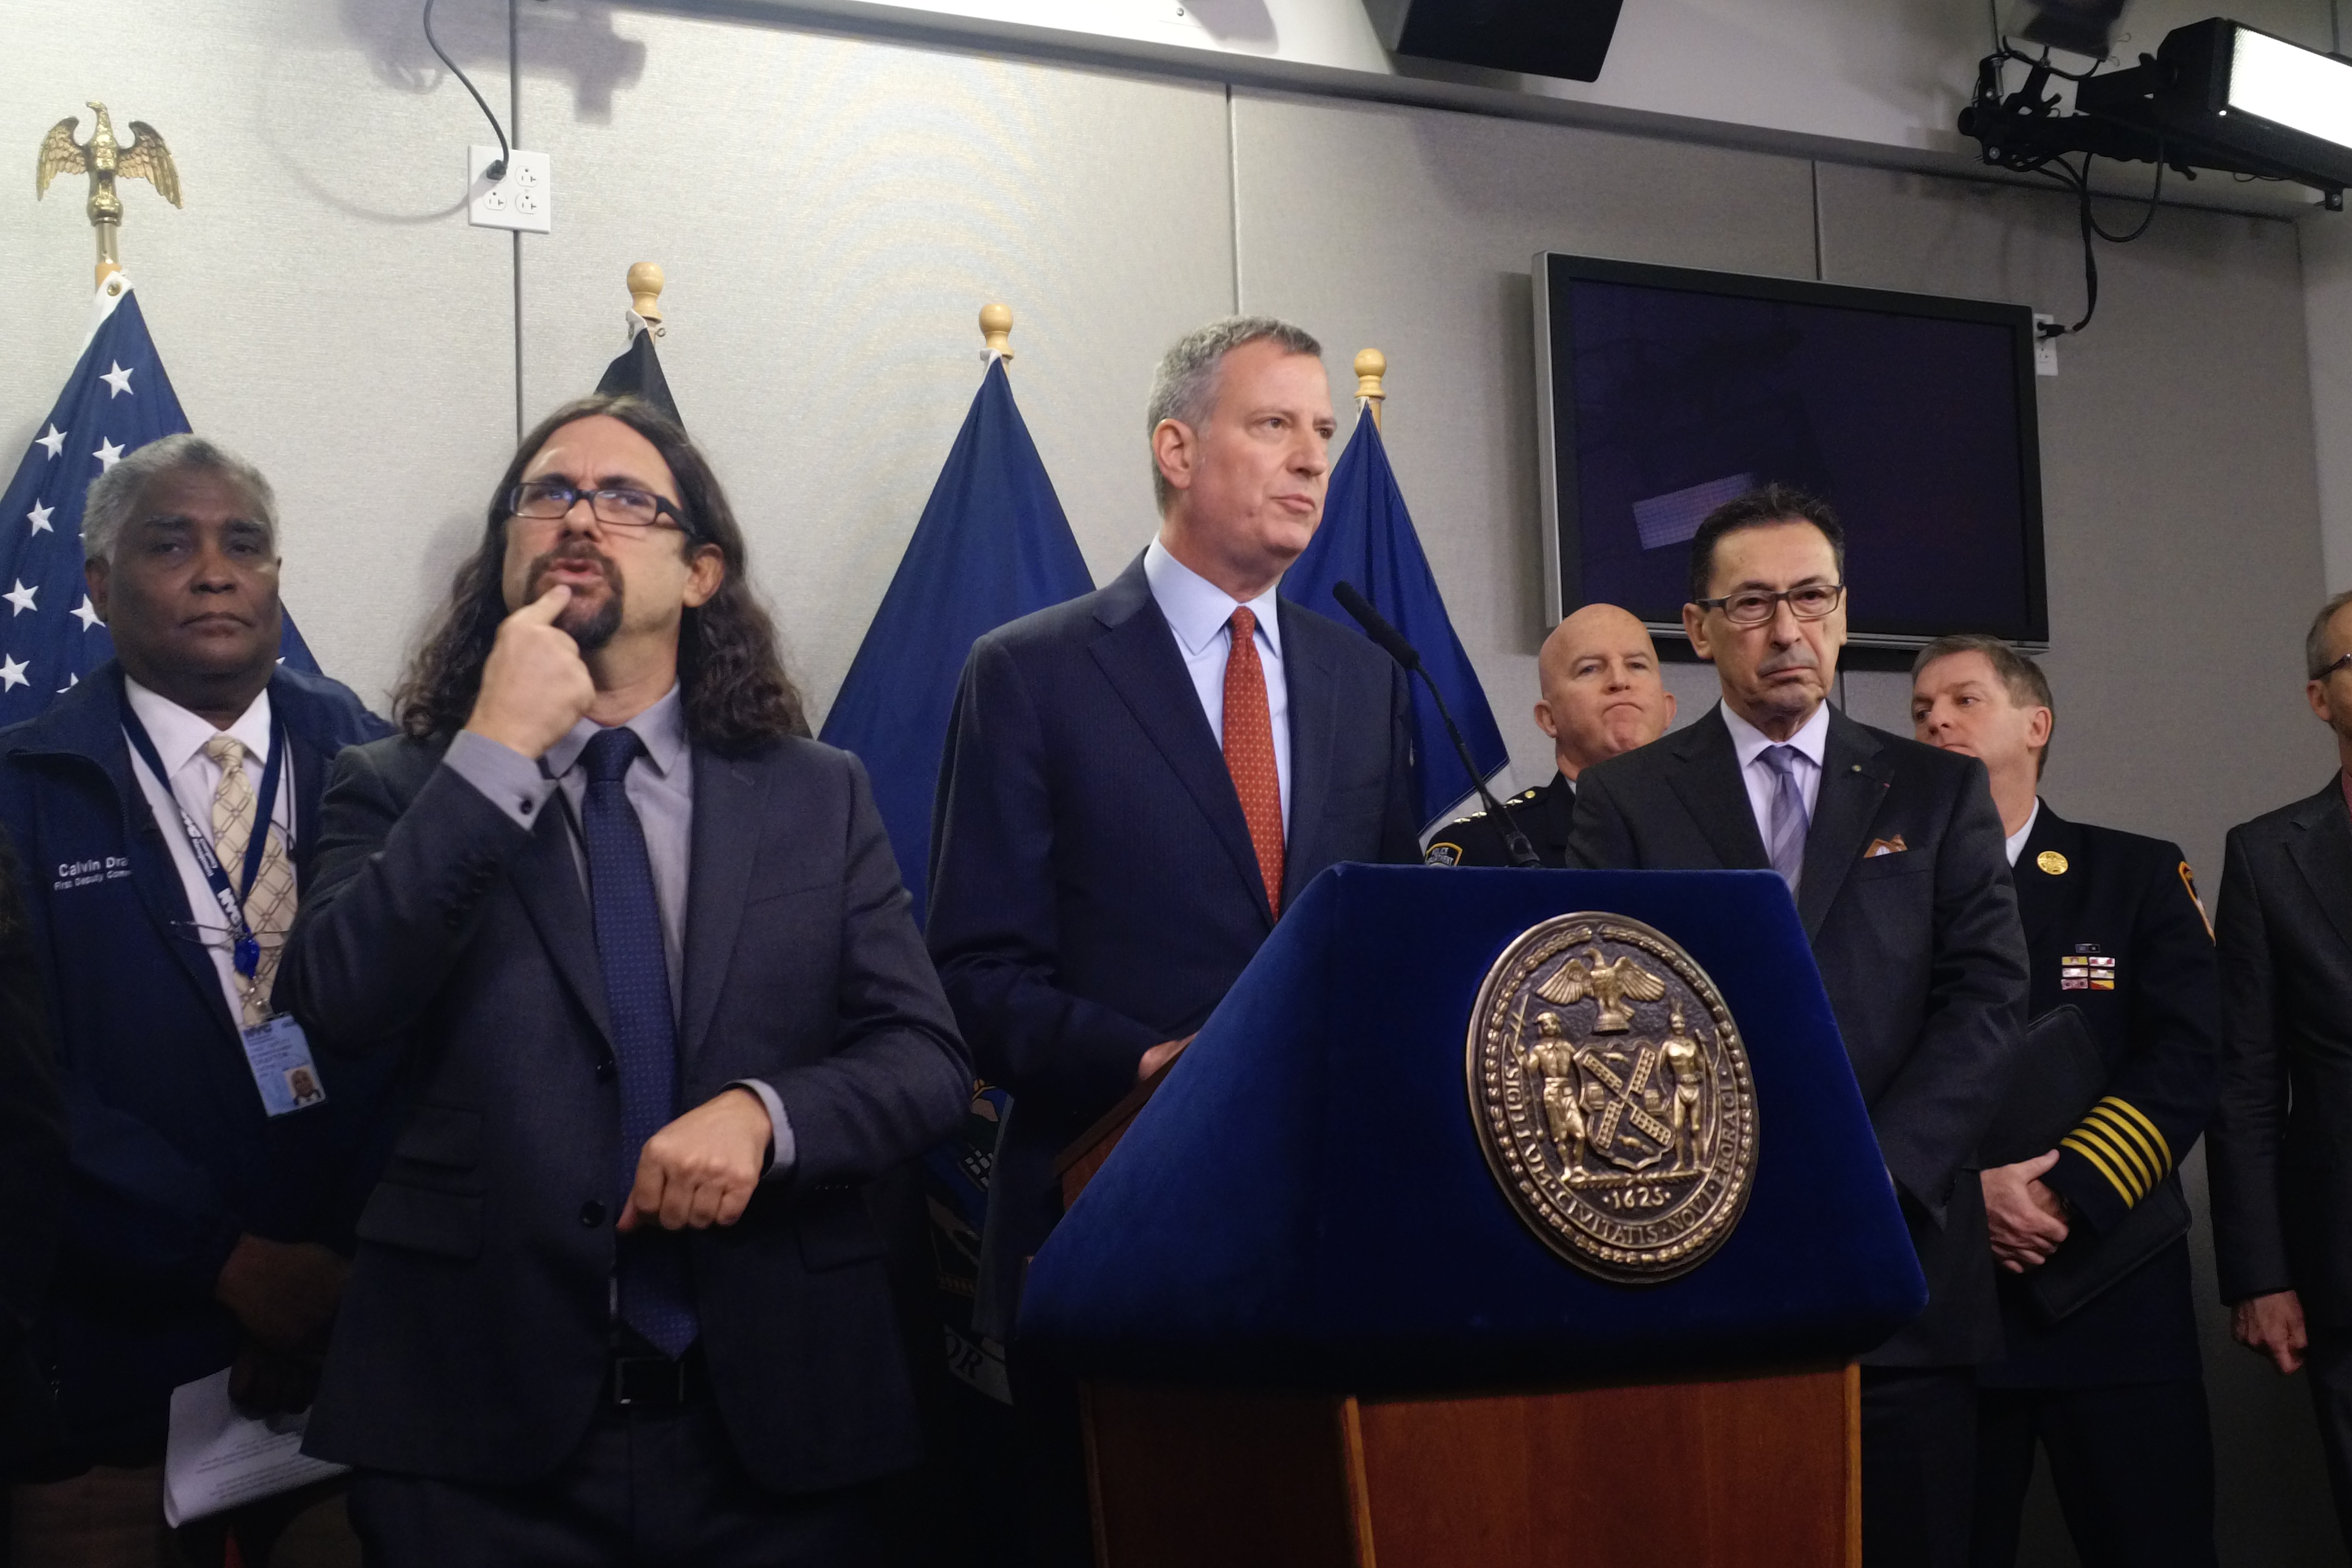 Mayor Bill de Blasio updates New Yorkers on an impending blizzard, with help from a sign language interpreter, at the Office of Emergency Management. (Photo: Jillian Jorgensen for Observer)